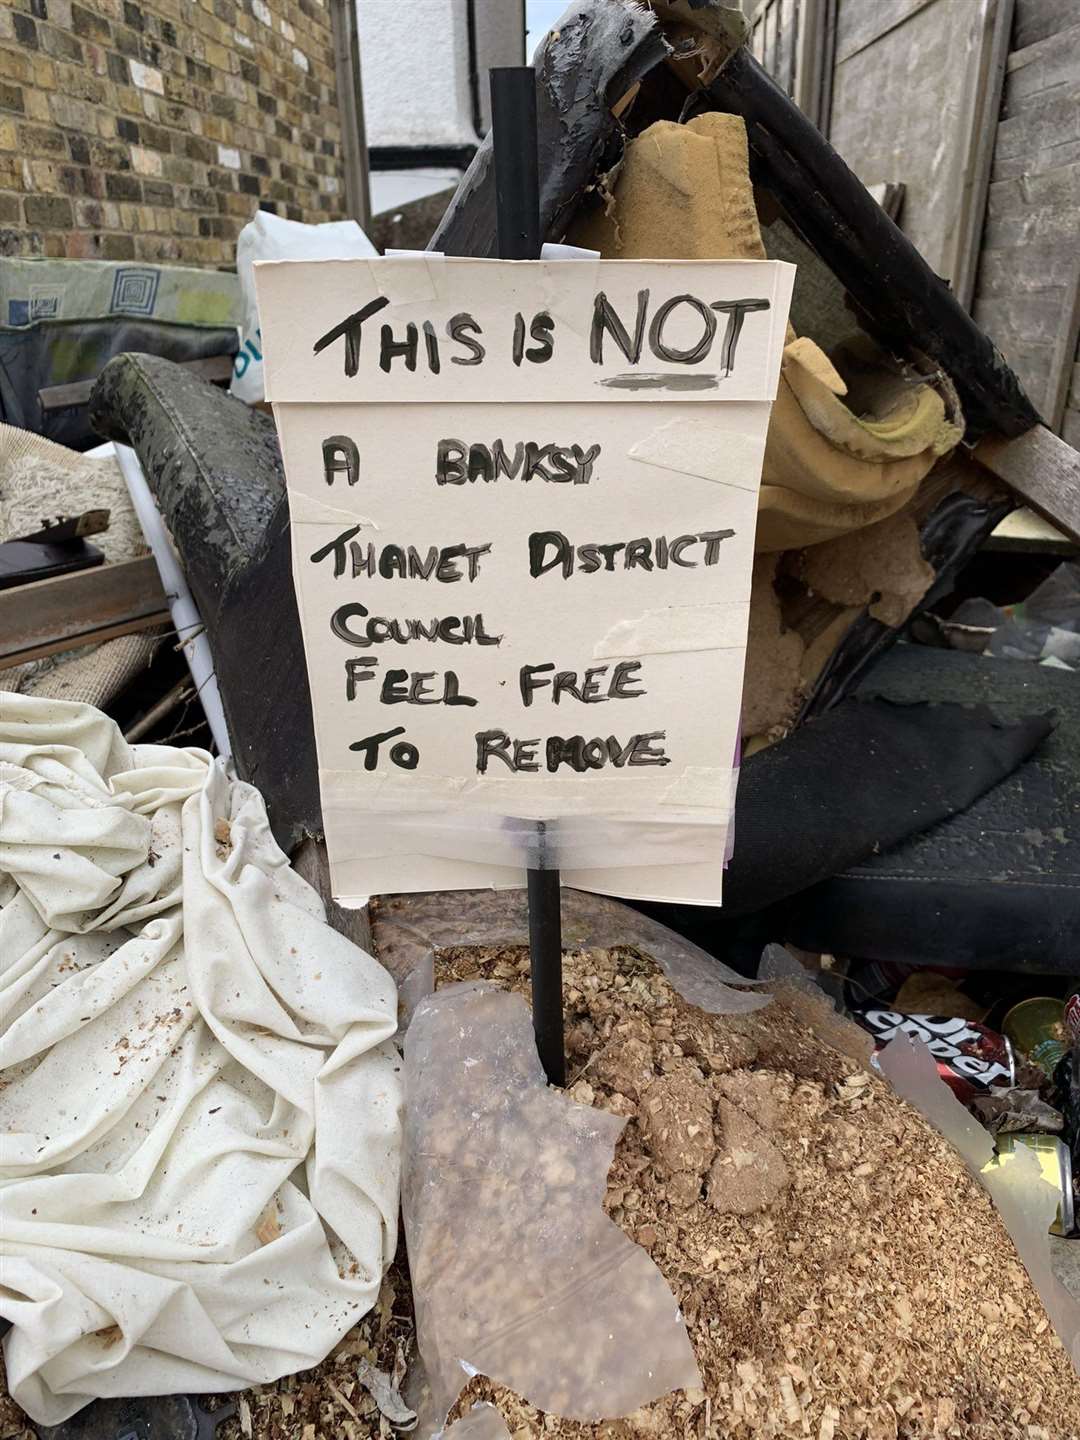 The comical sign was added after Thanet District Council removed the freezer